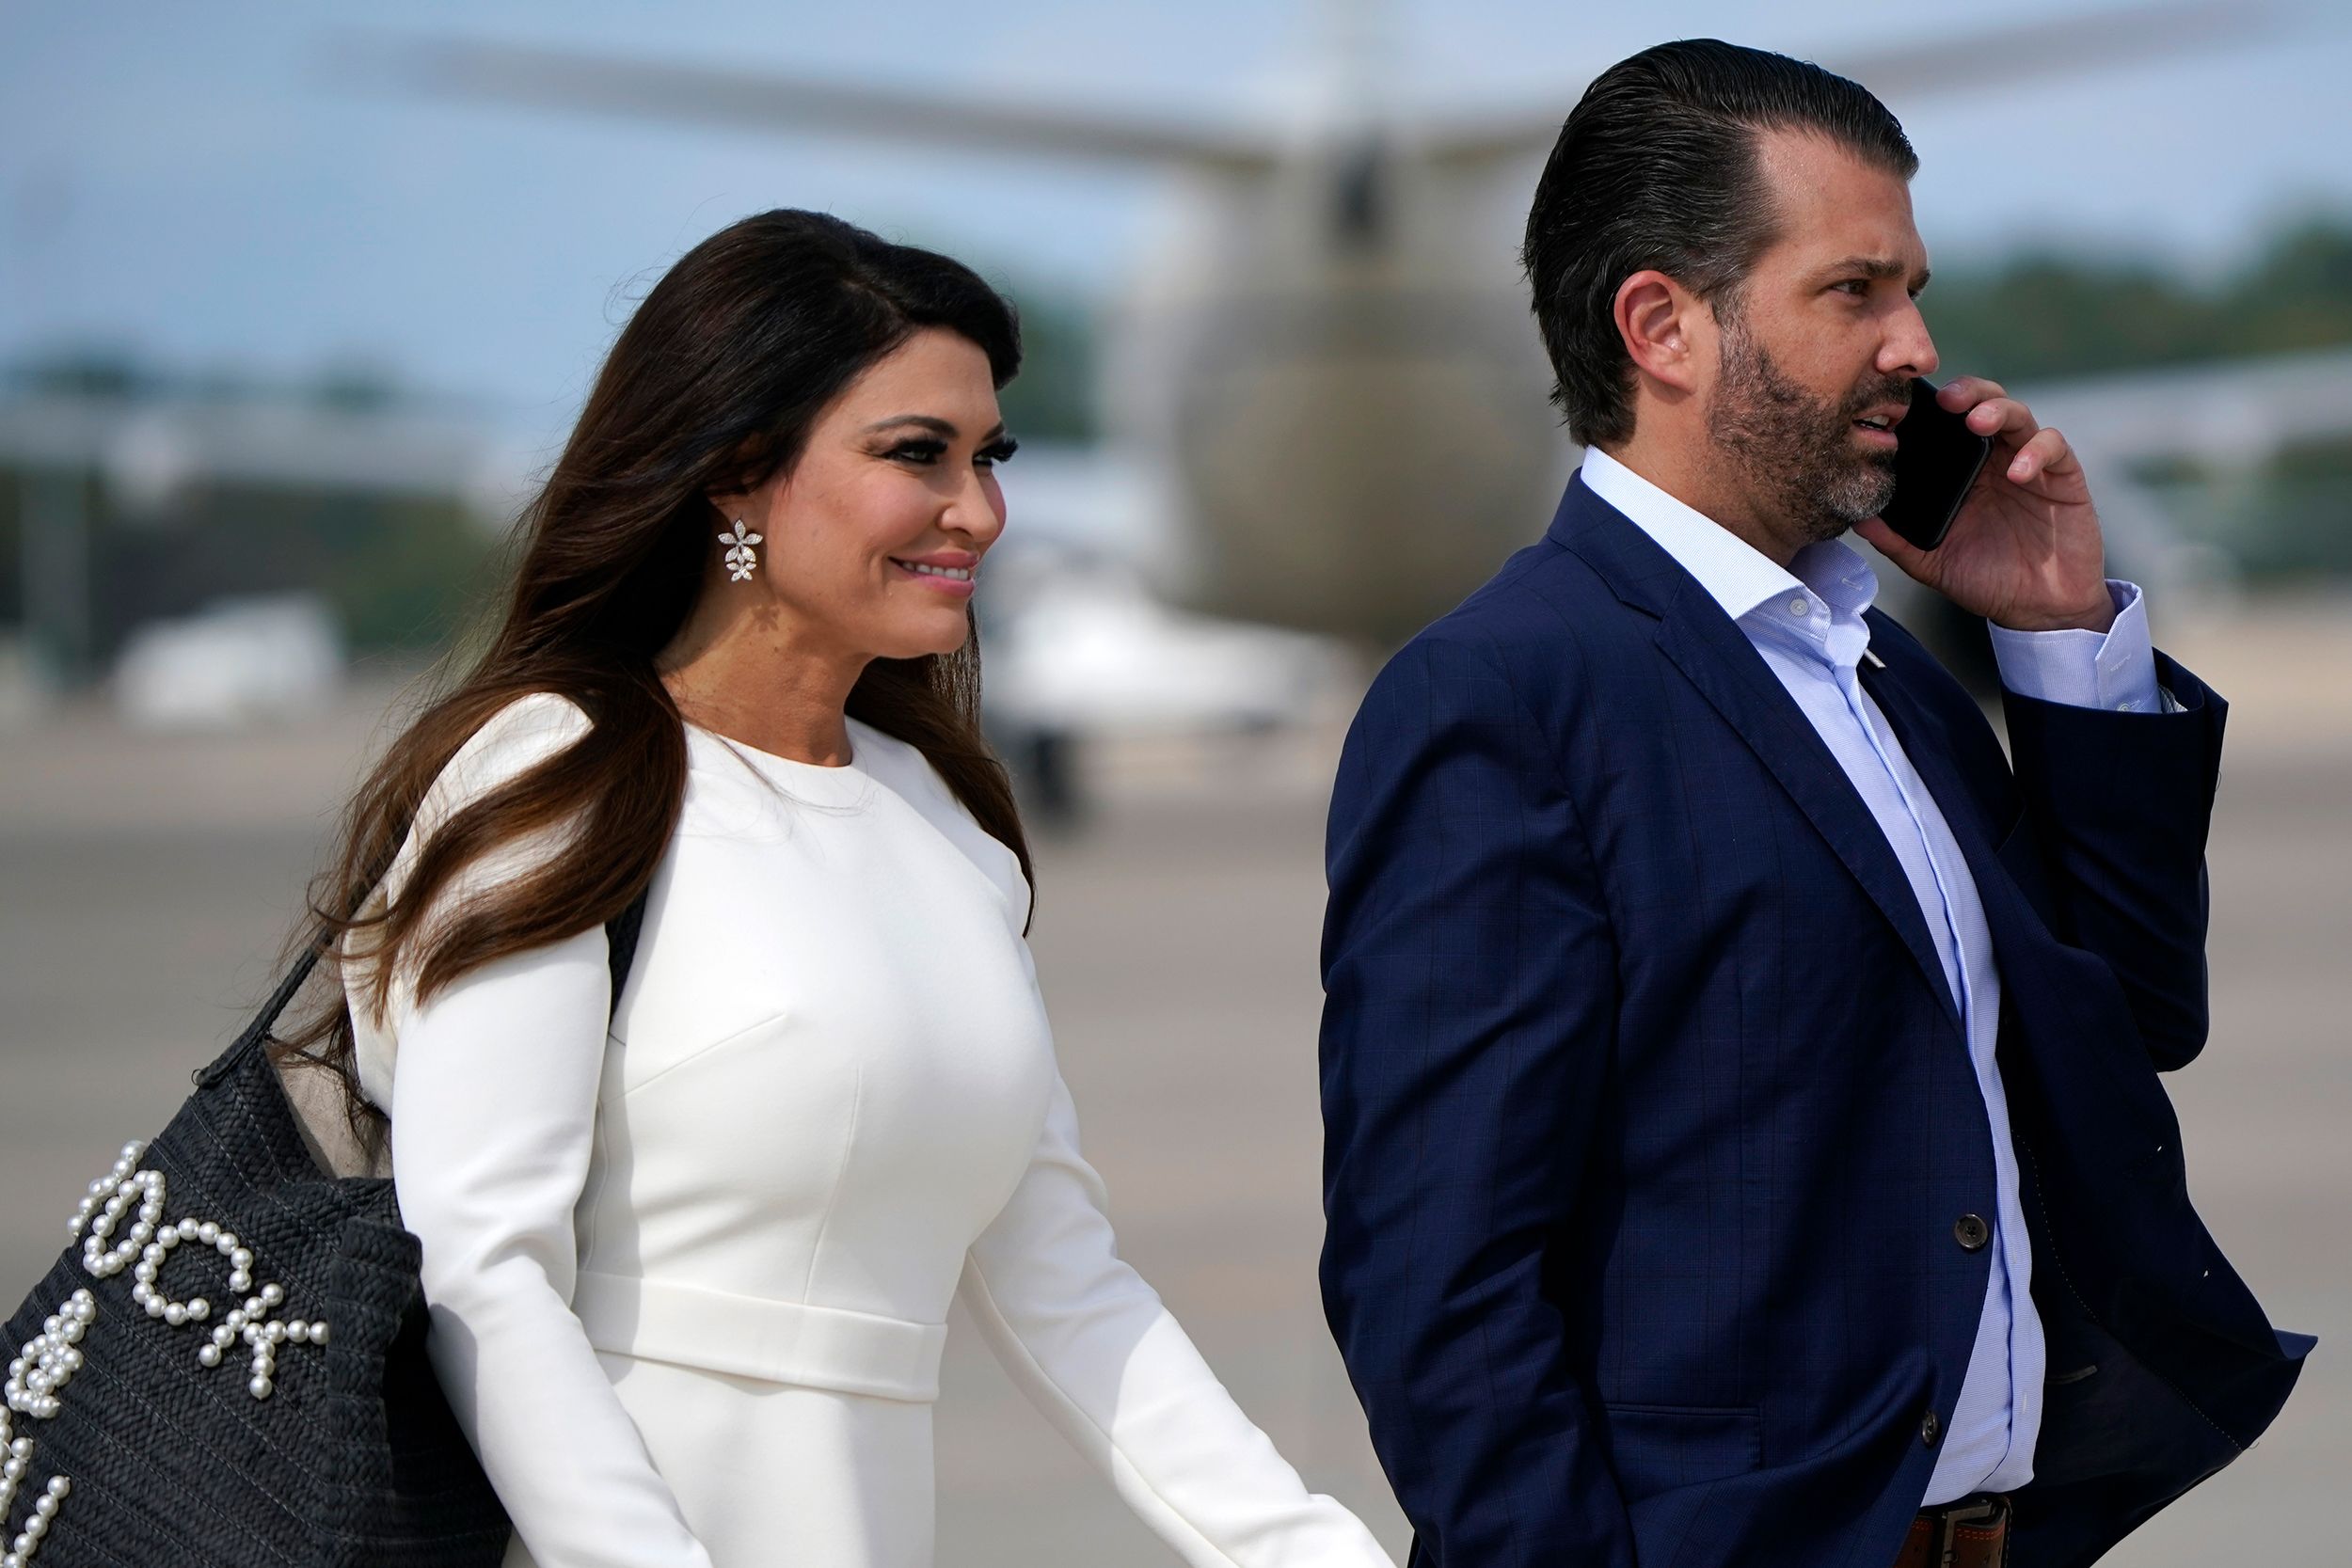 Kimberly Guilfoyle Nude Porn - Fox News paid Kimberly Guilfoyle's former assistant $4 million after sexual  harassment accusations, New Yorker reports | CNN Business